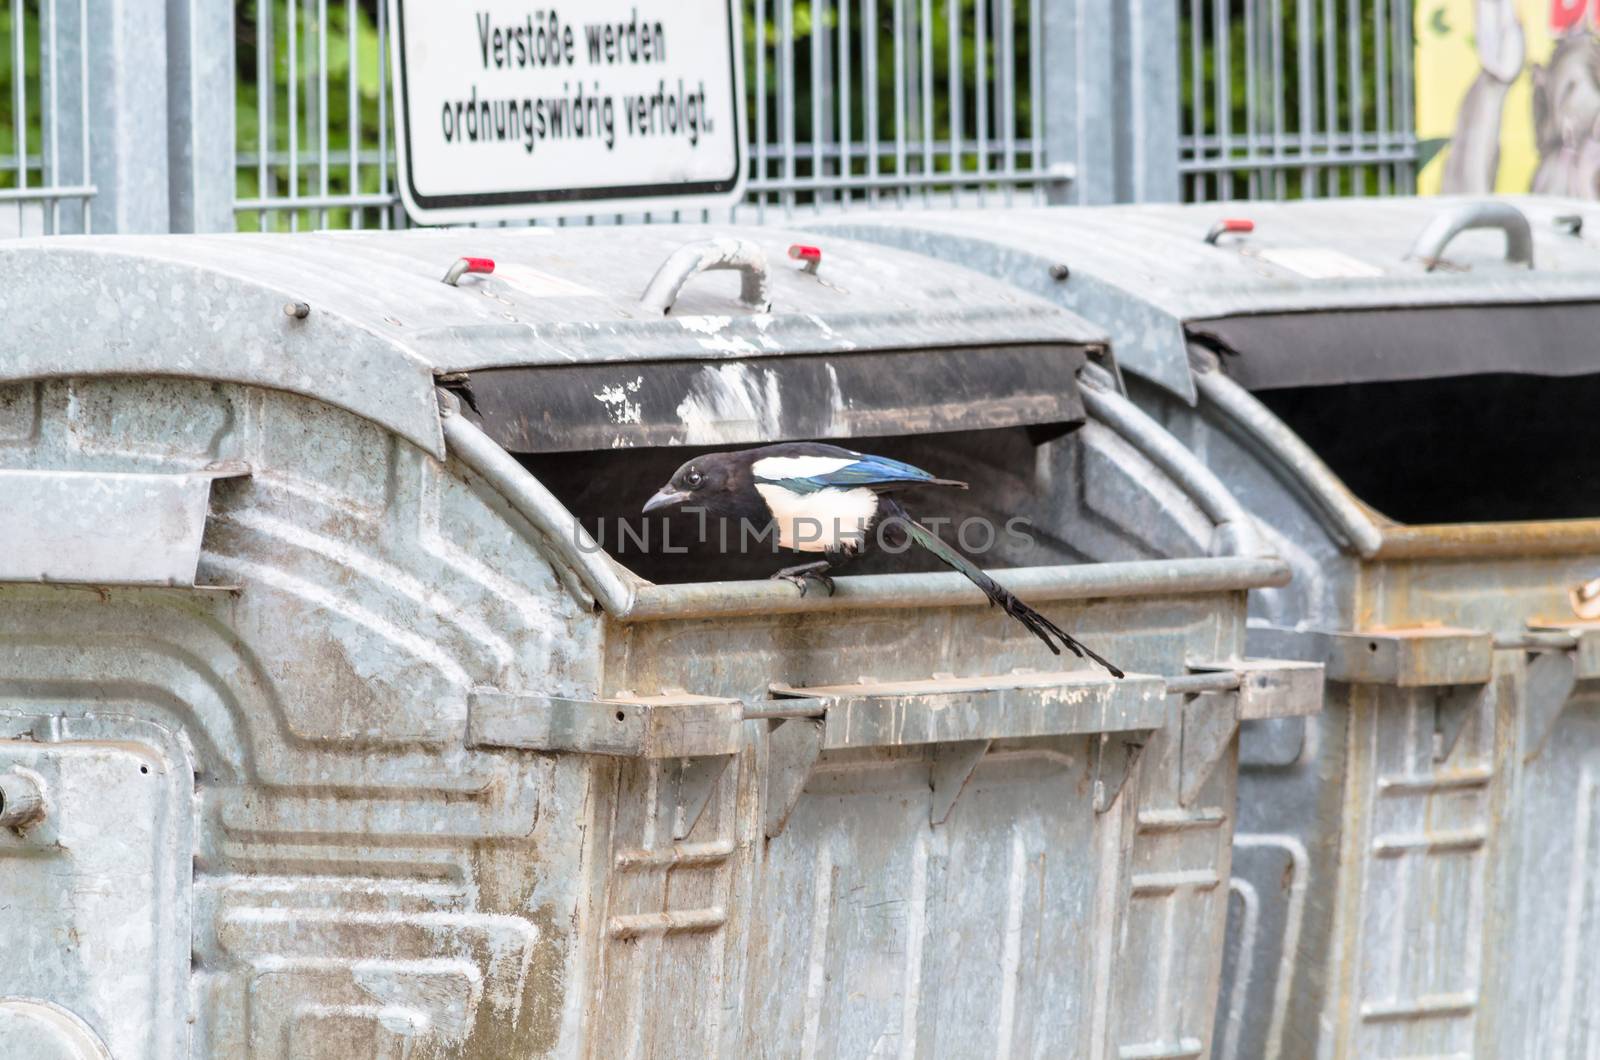 A Thieving Magpie on a garbage can. Steal wastes for nest building from the dumpsters.